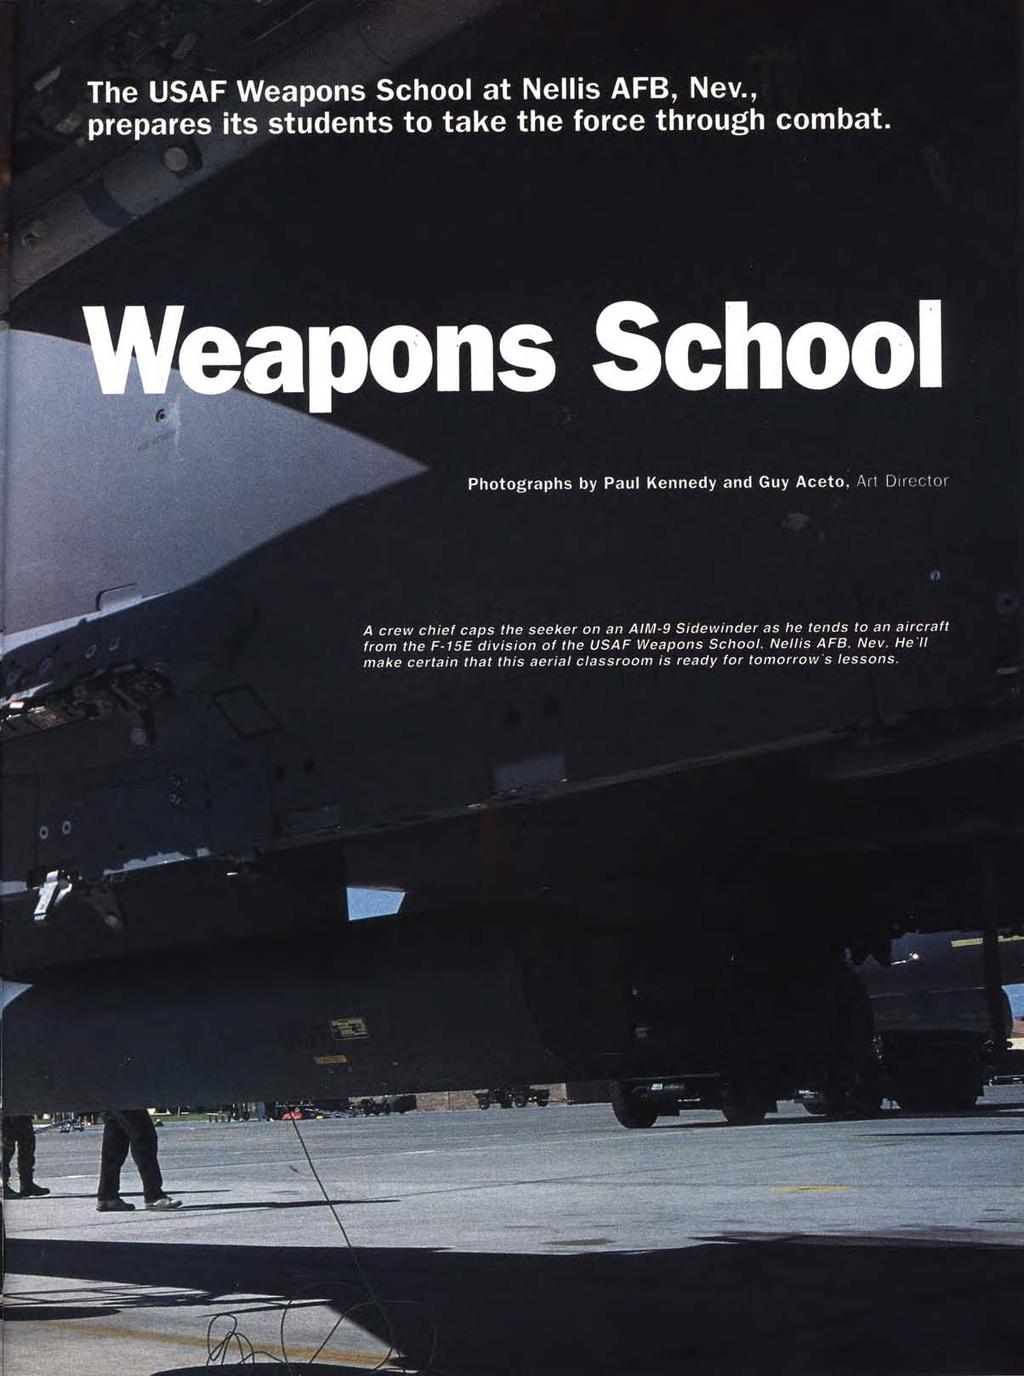 The USAF Weapons School at Nellis AFB, Nev., prepares its students to take the force through combat. Weapons School Photographs by Paul Kennedy and Guy Aceto, Art Director.